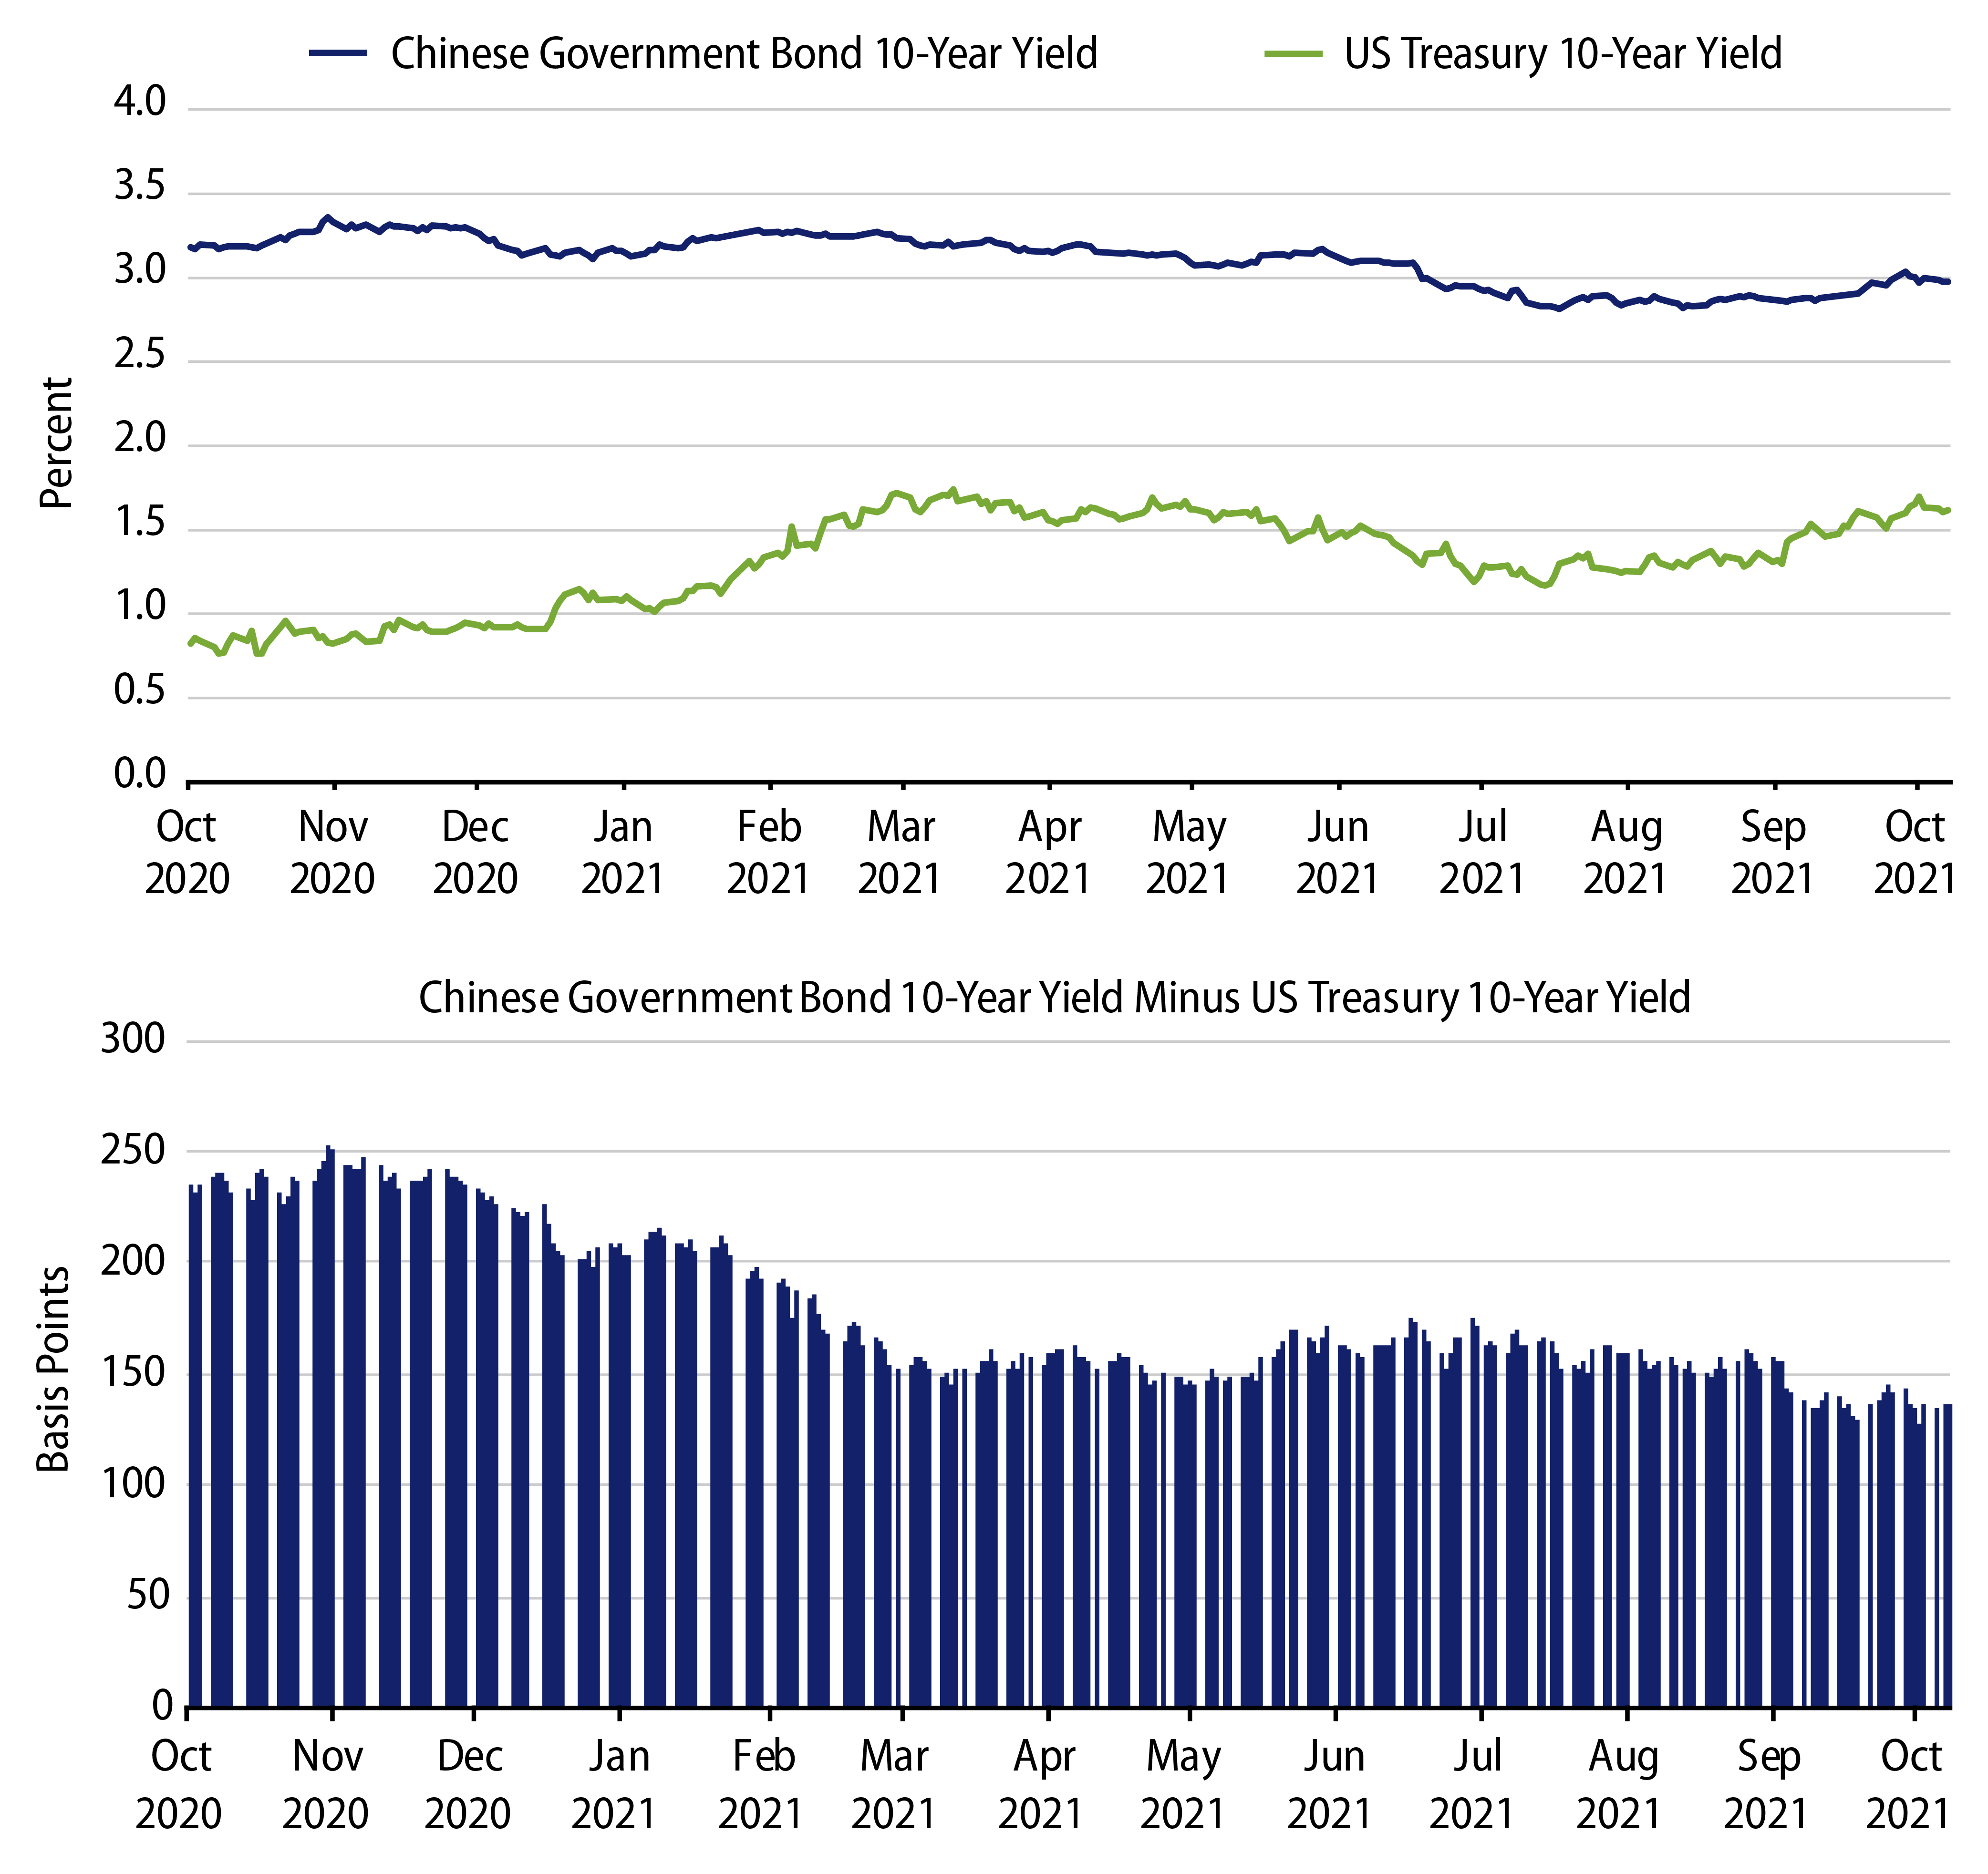 High Quality Chinese Bonds Have Performed Well YTD